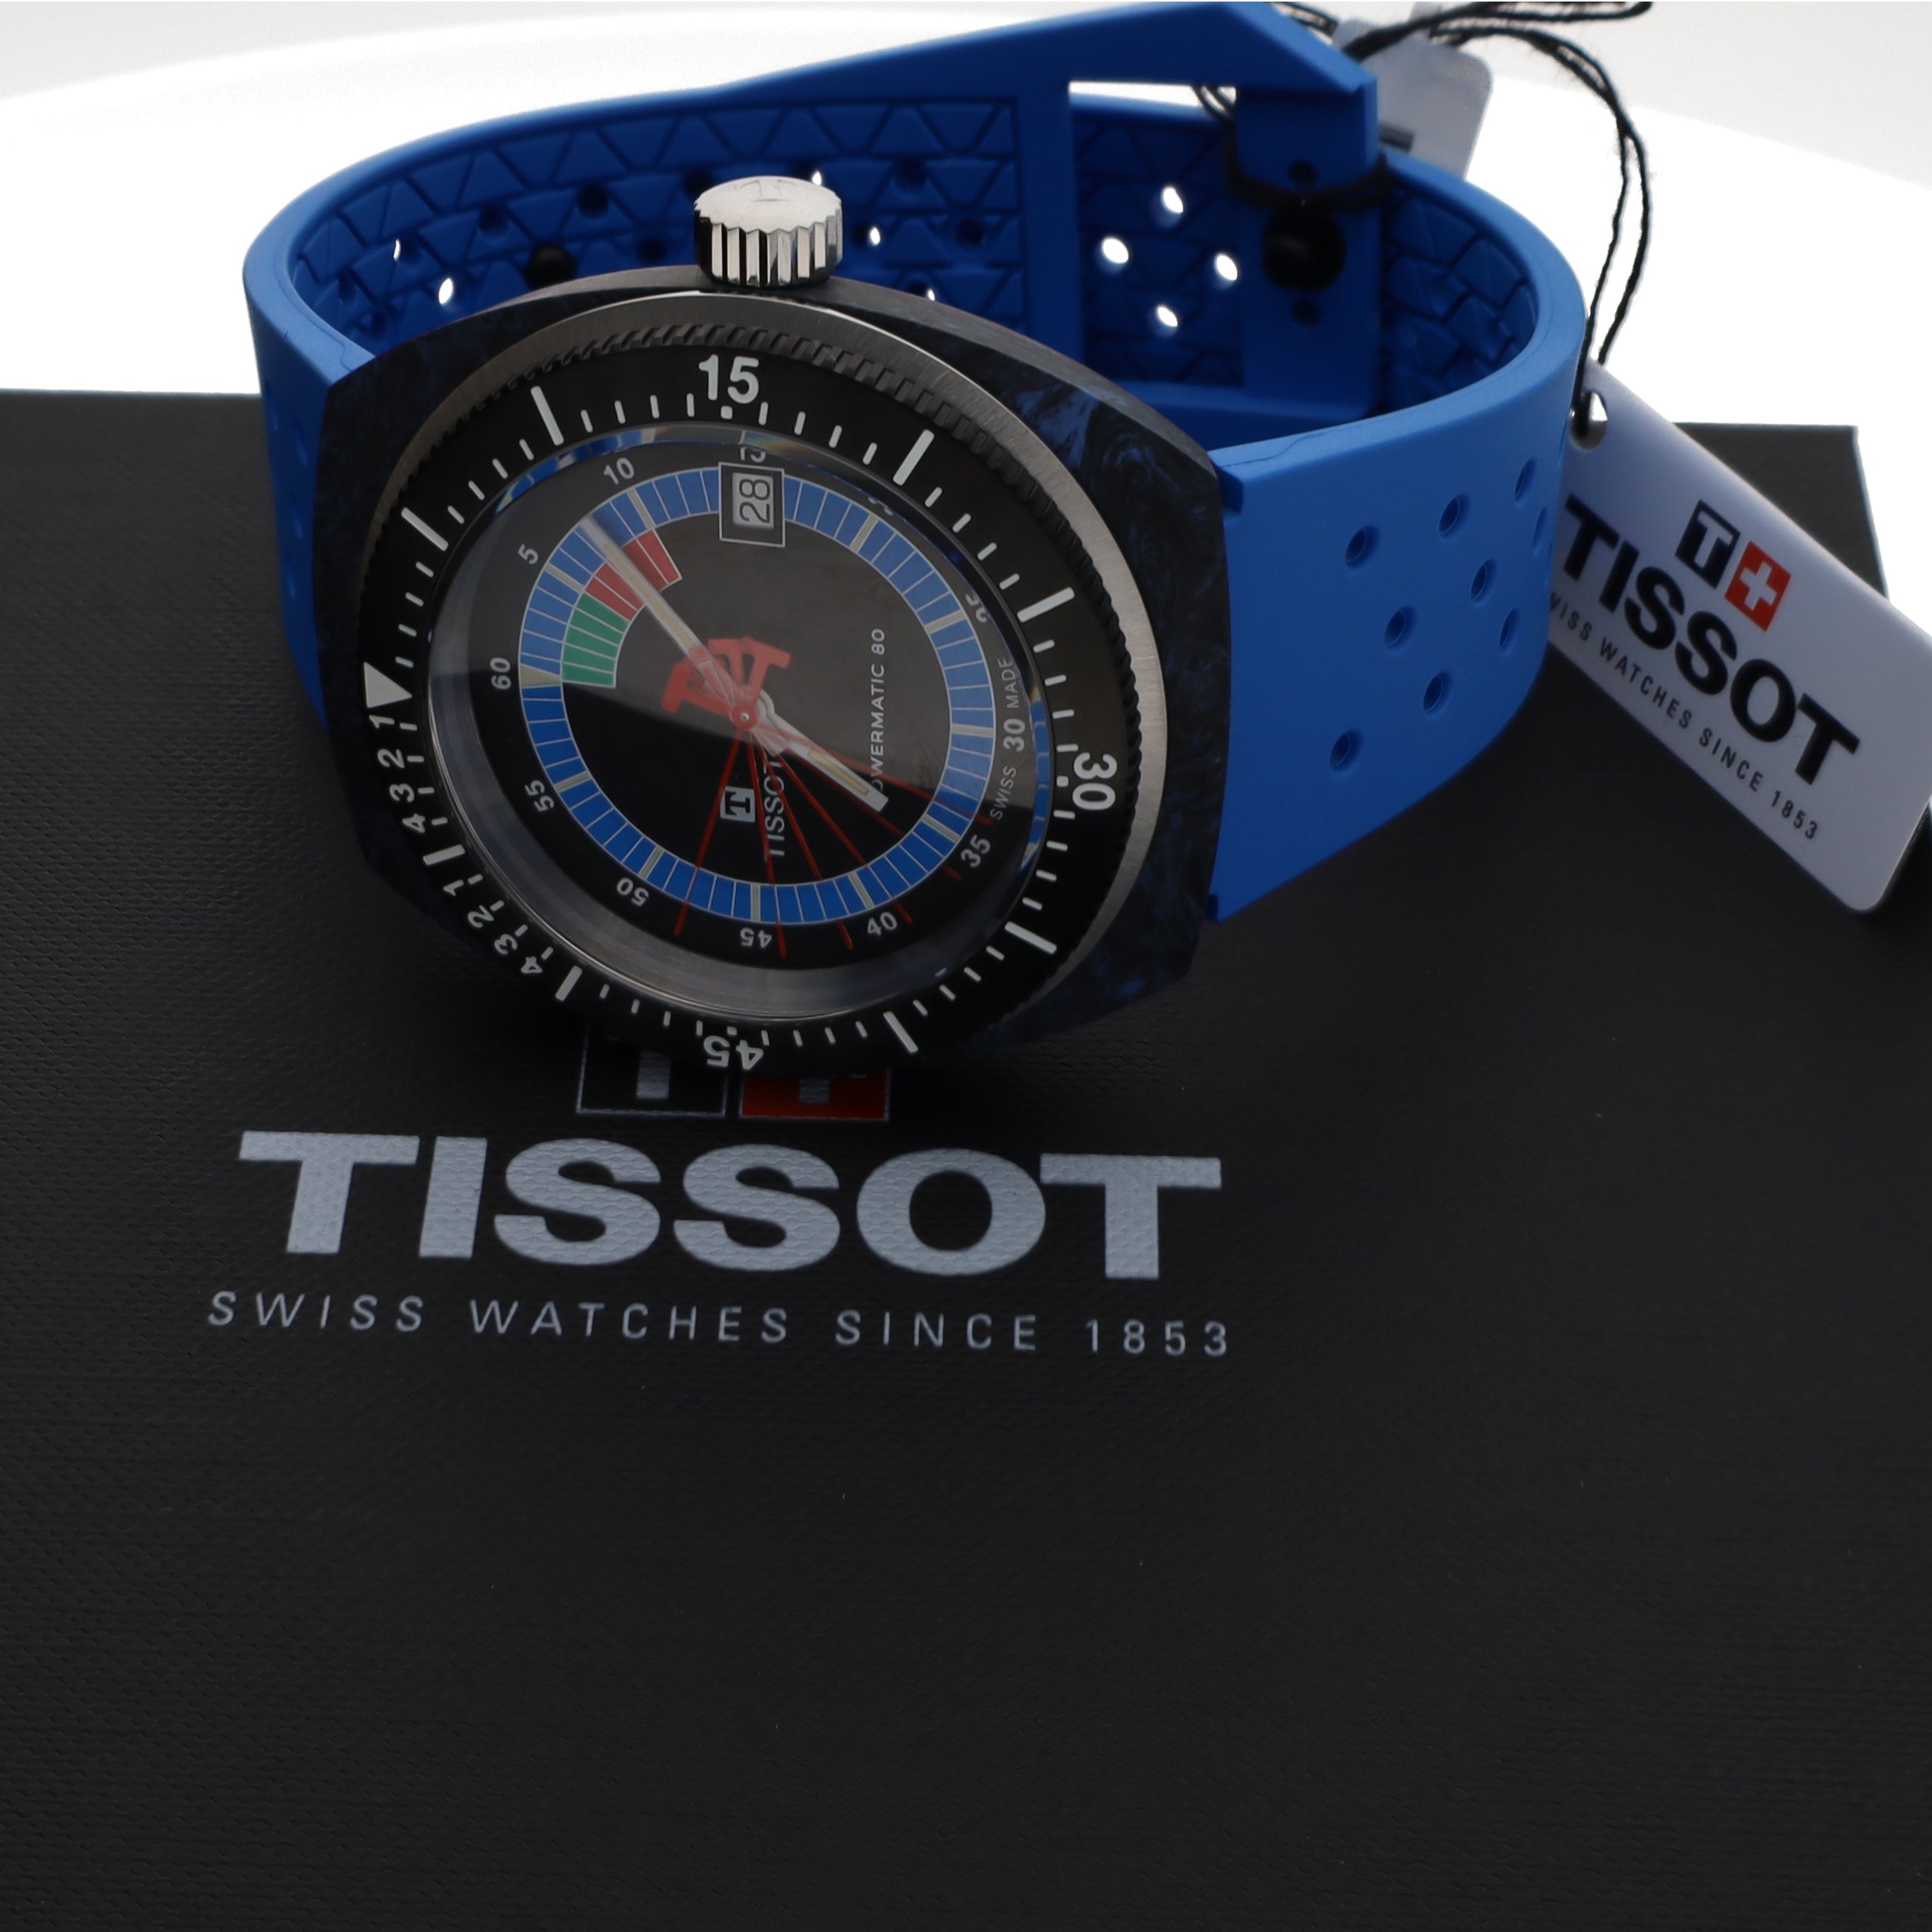 Tissot T-Sport Sideral S Powermatic 80 41mm Forged Marble Carbon Case Watch